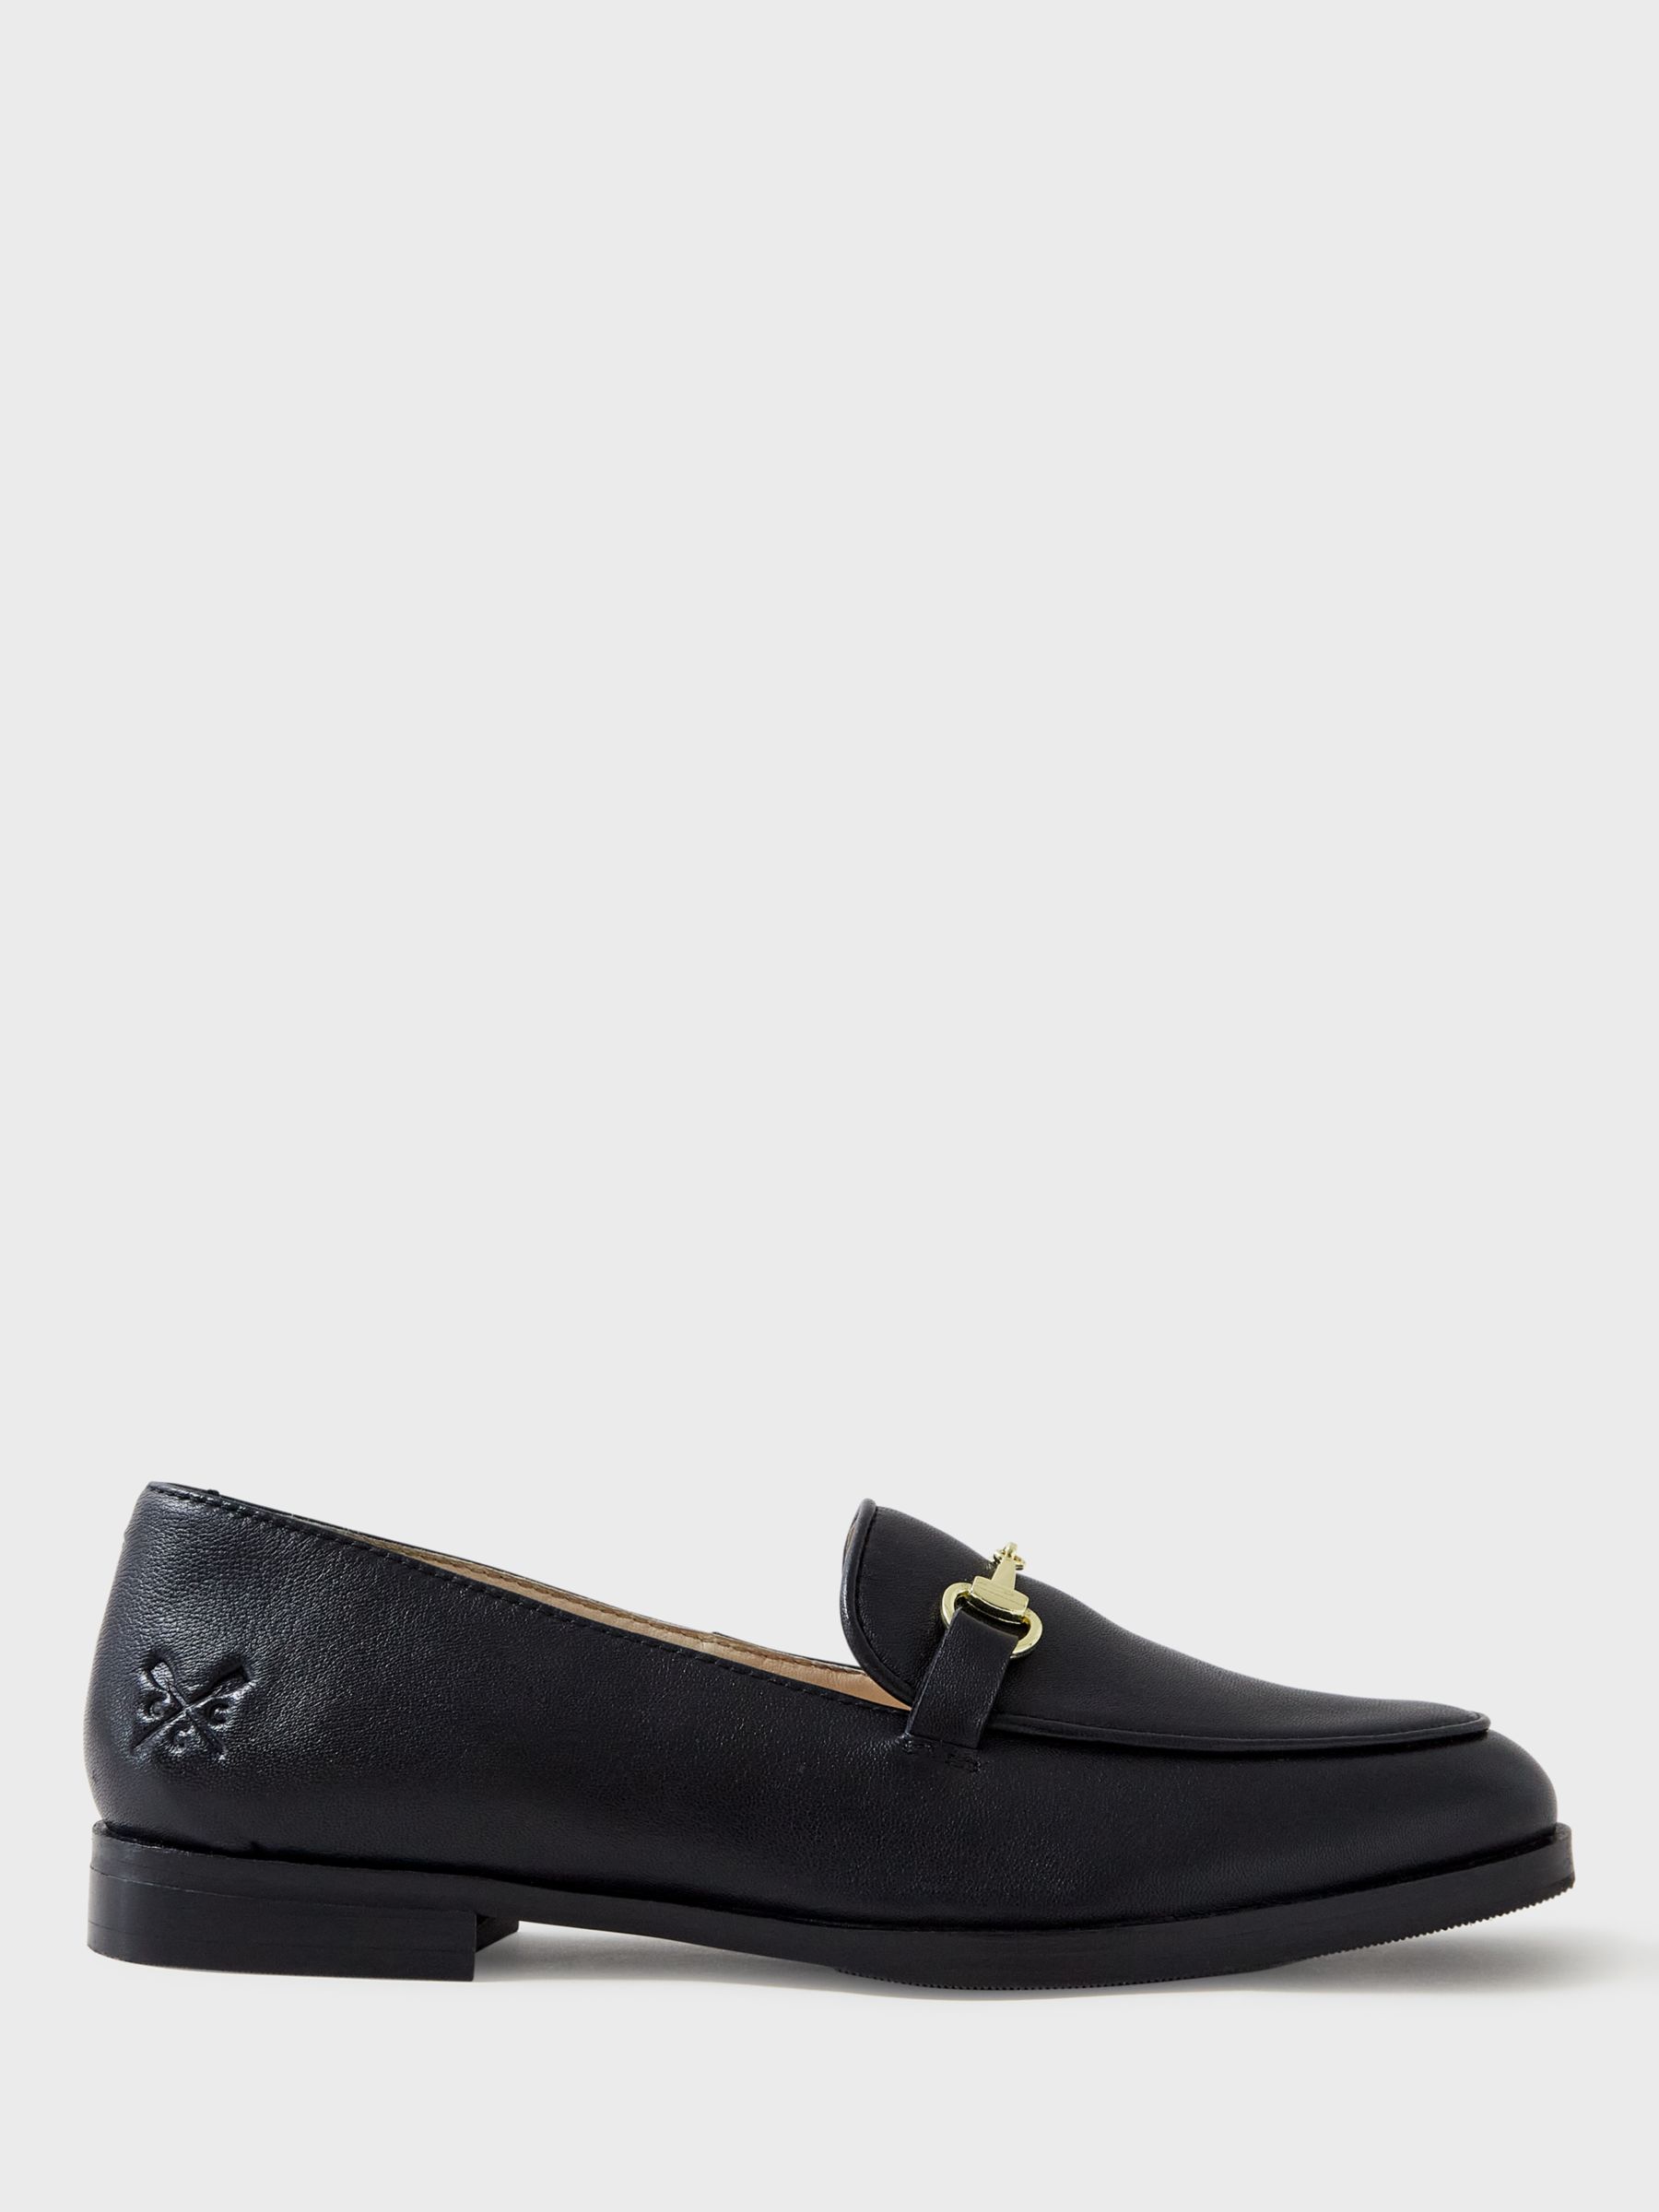 Crew Clothing Cora Leather Loafers, Black at John Lewis & Partners